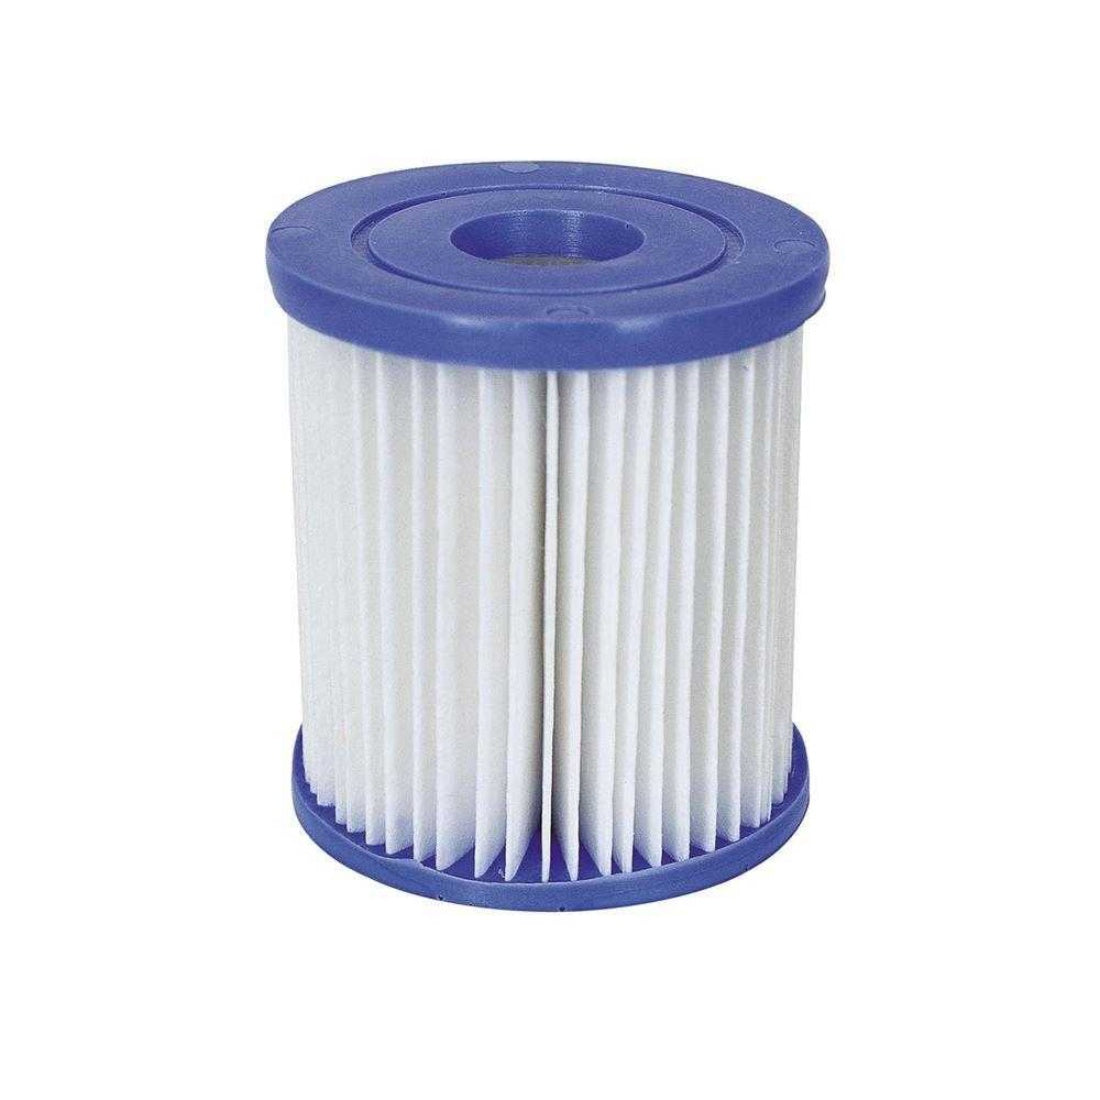 Bestway Filter Cartridge For Above Ground Swimming Pool 330 Gal/H Filter Pump